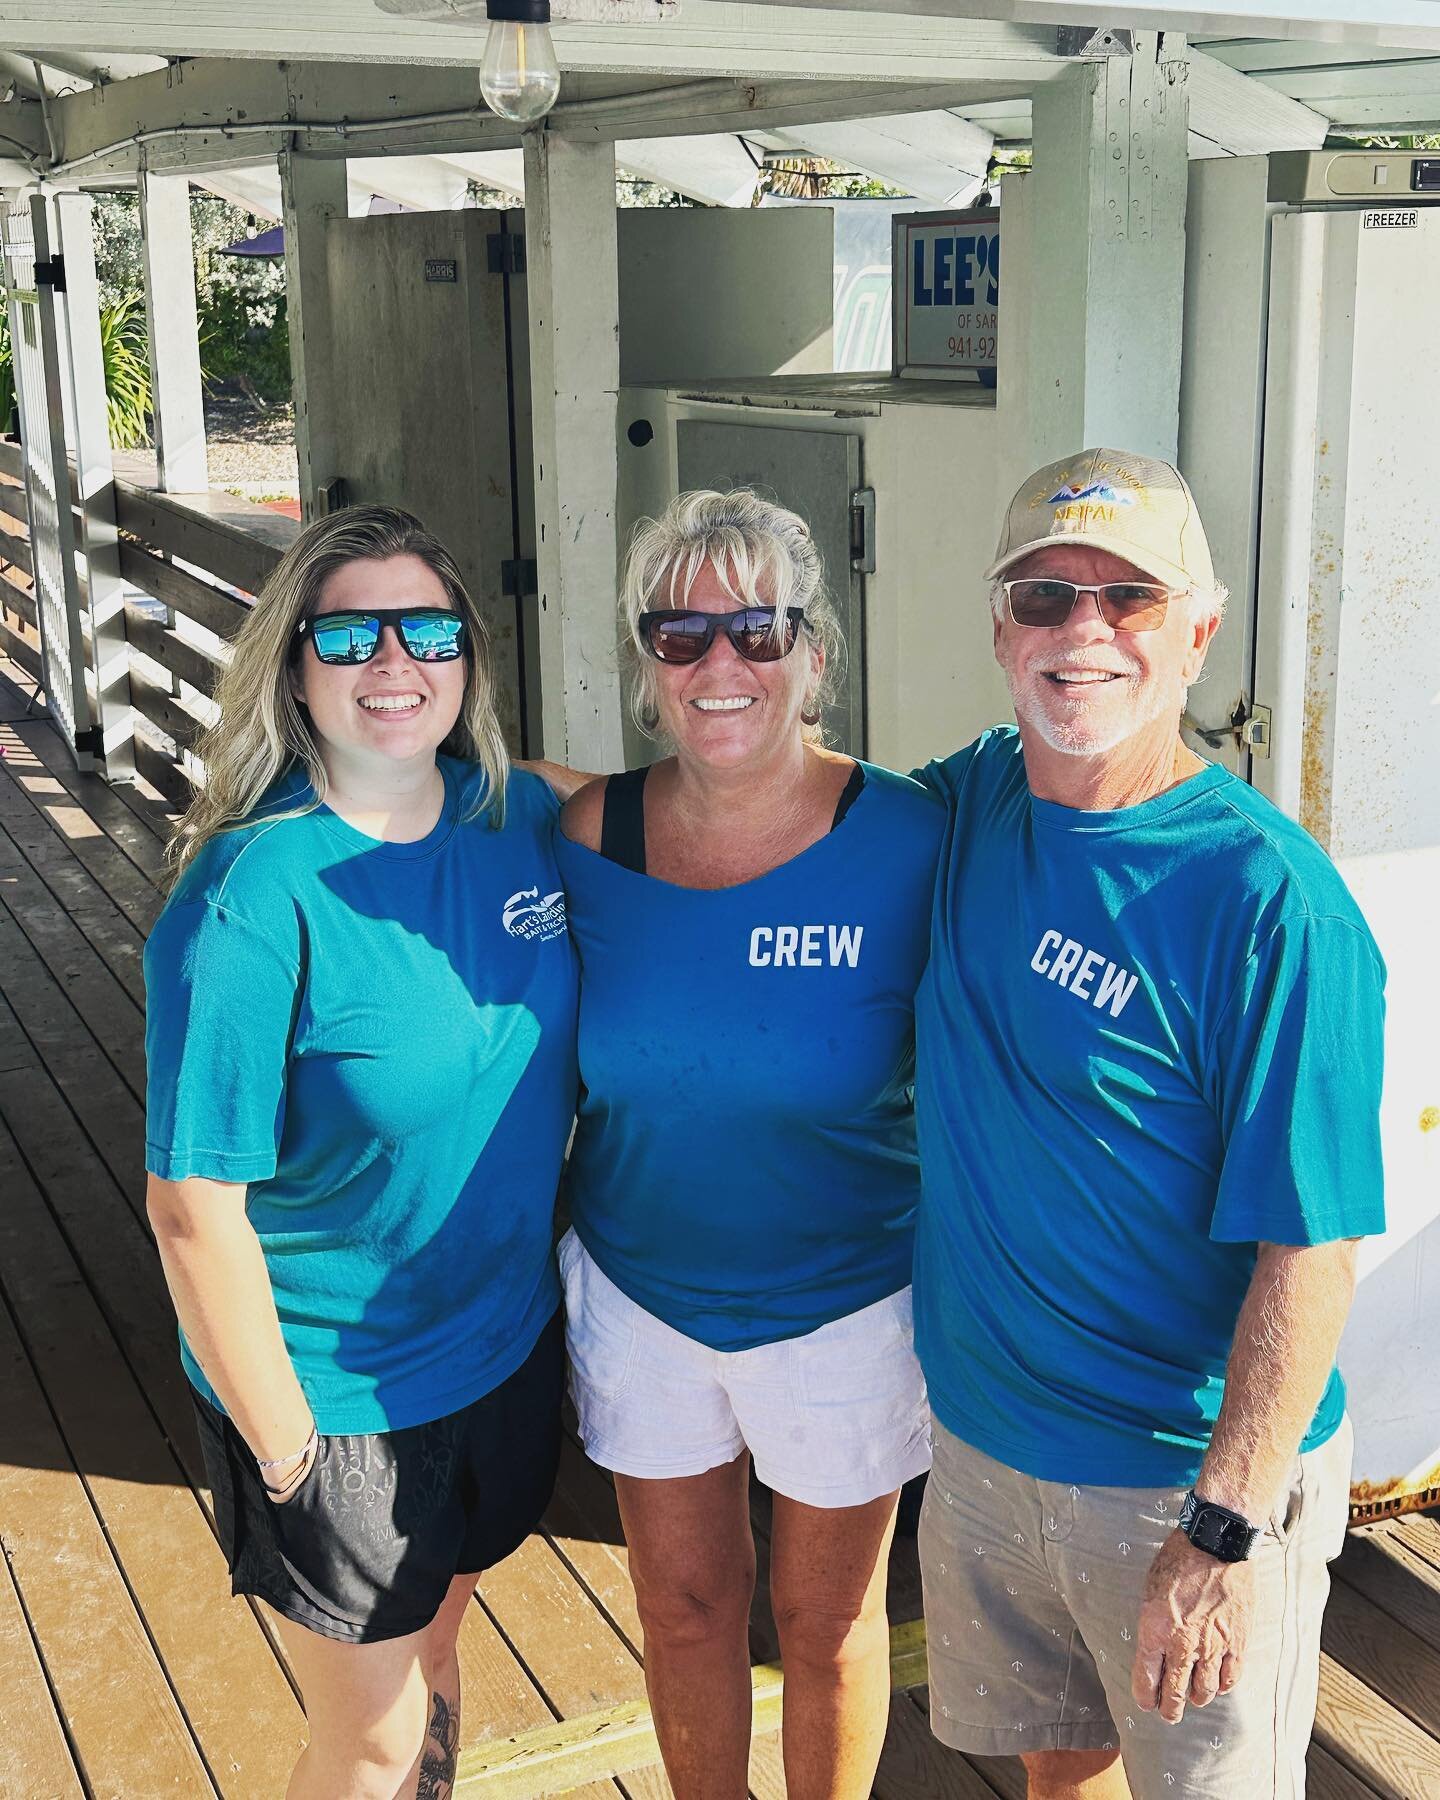 Our team is ready to serve you this Mother's Day weekend! We got Kettle of Fish playing at 7 pm. We have live shrimp and crabs! #livemusicsarasota #fishingsarasota #thingstodoinsarasota